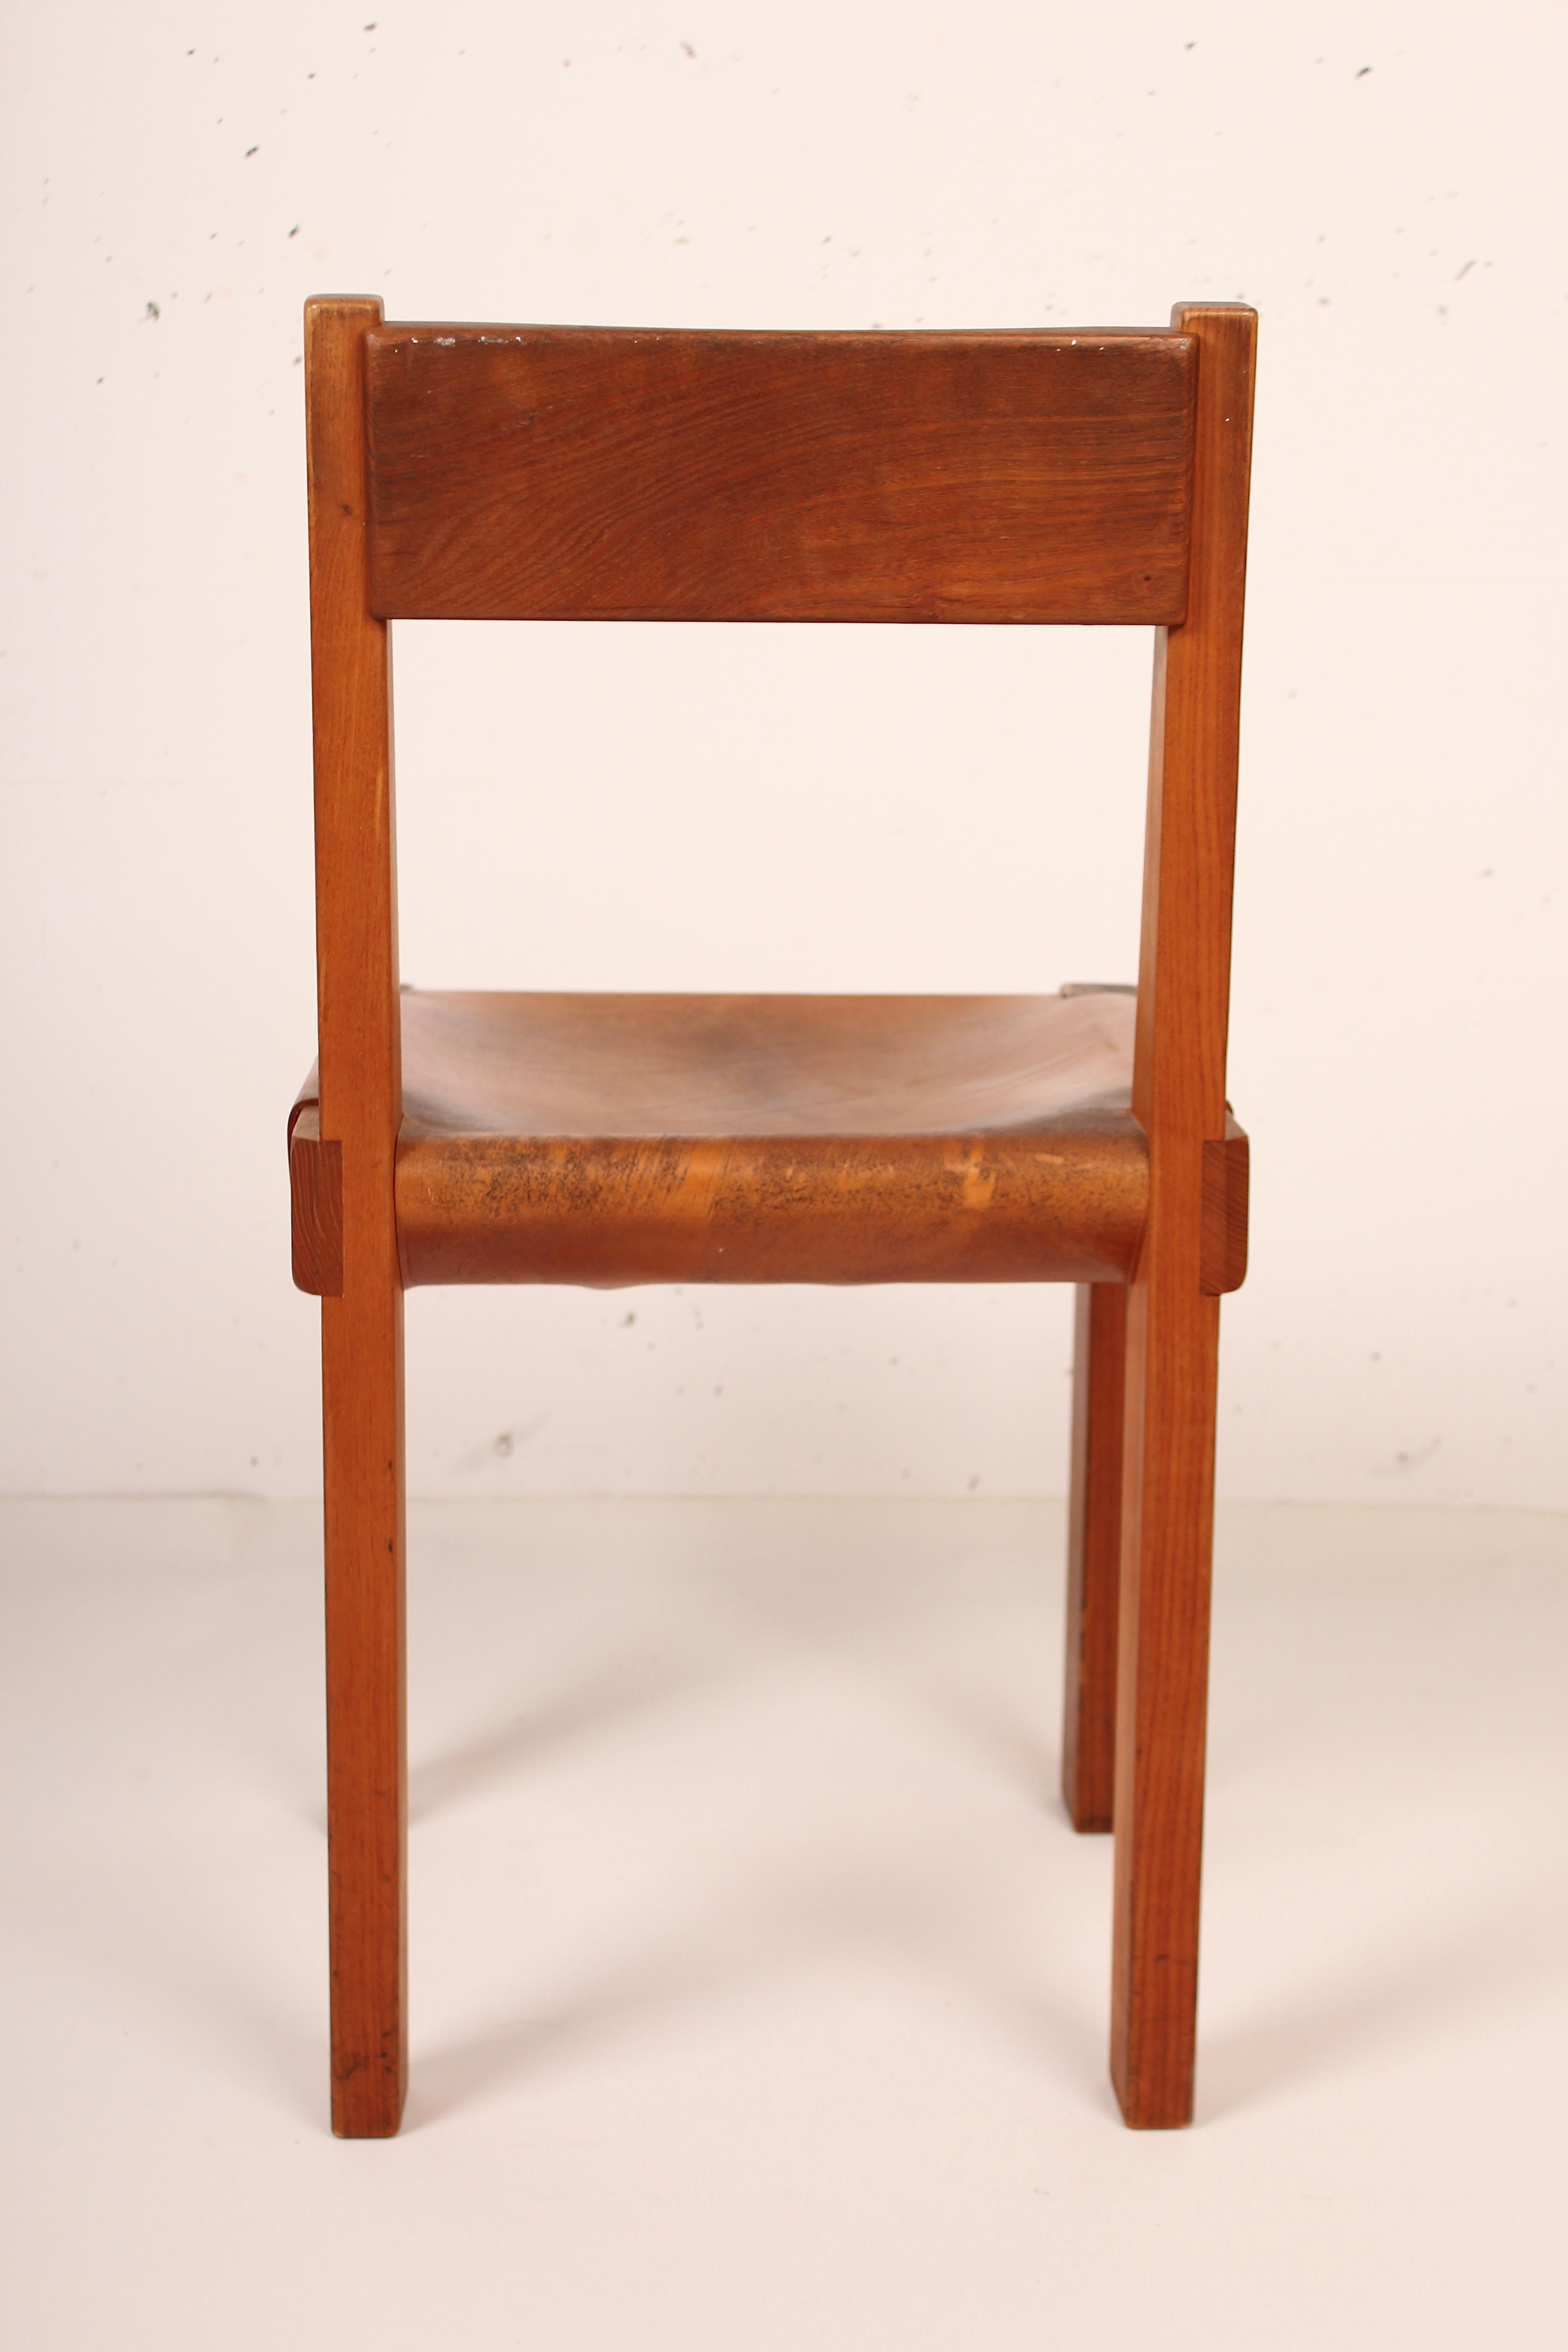 Pierre Chapo Set of Four Elm and Leather S 24 Dining Chairs, France, 1960s For Sale 7